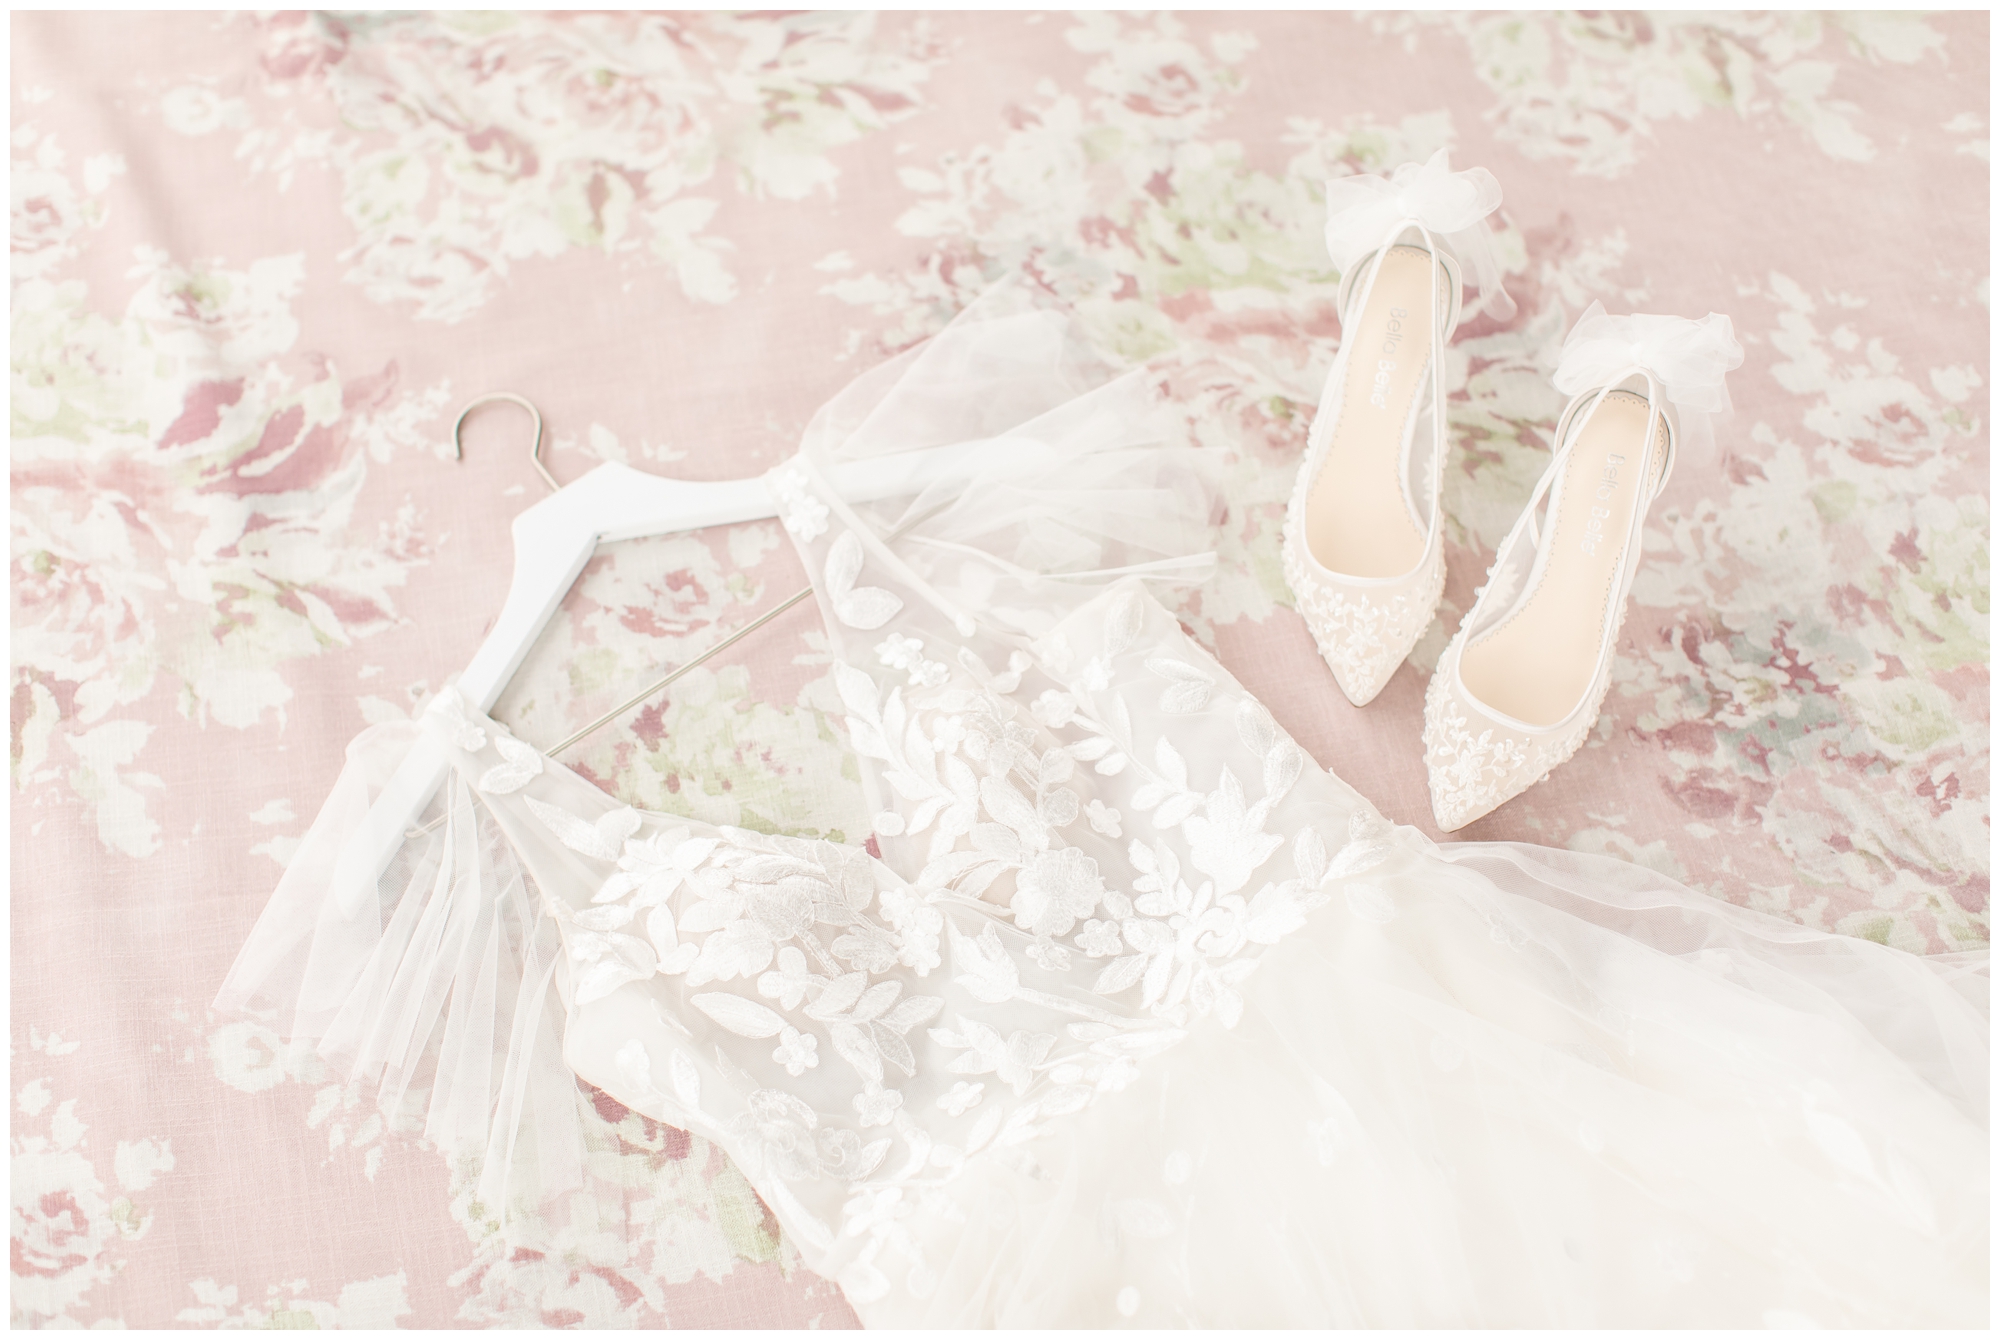 Floral background with wedding dress and Bella belle shoes